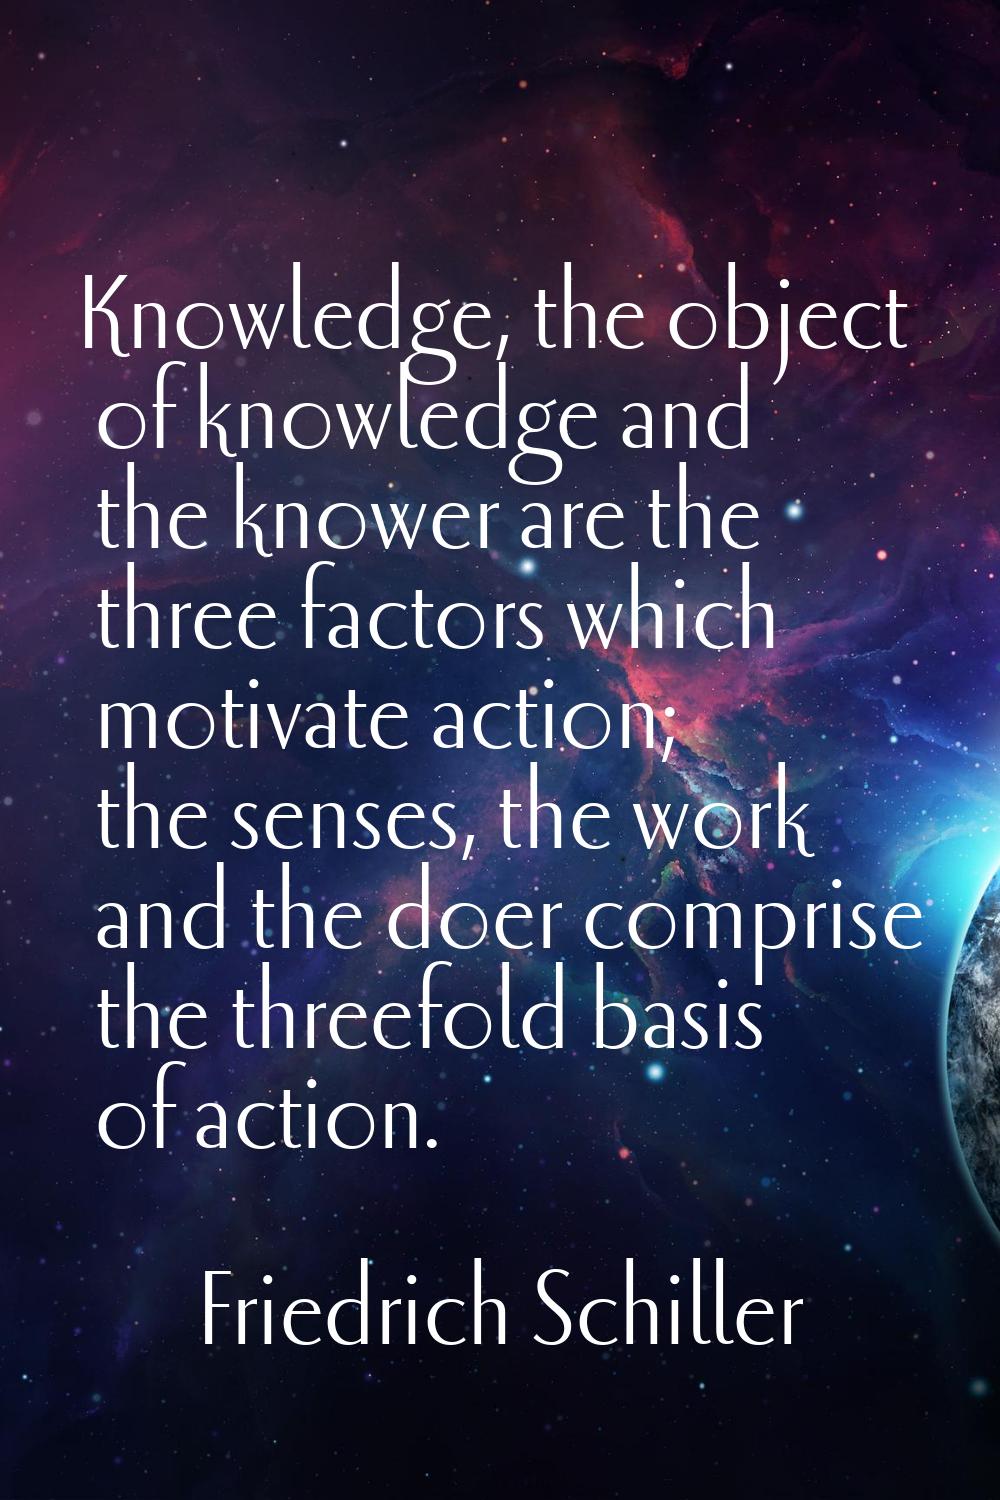 Knowledge, the object of knowledge and the knower are the three factors which motivate action; the 